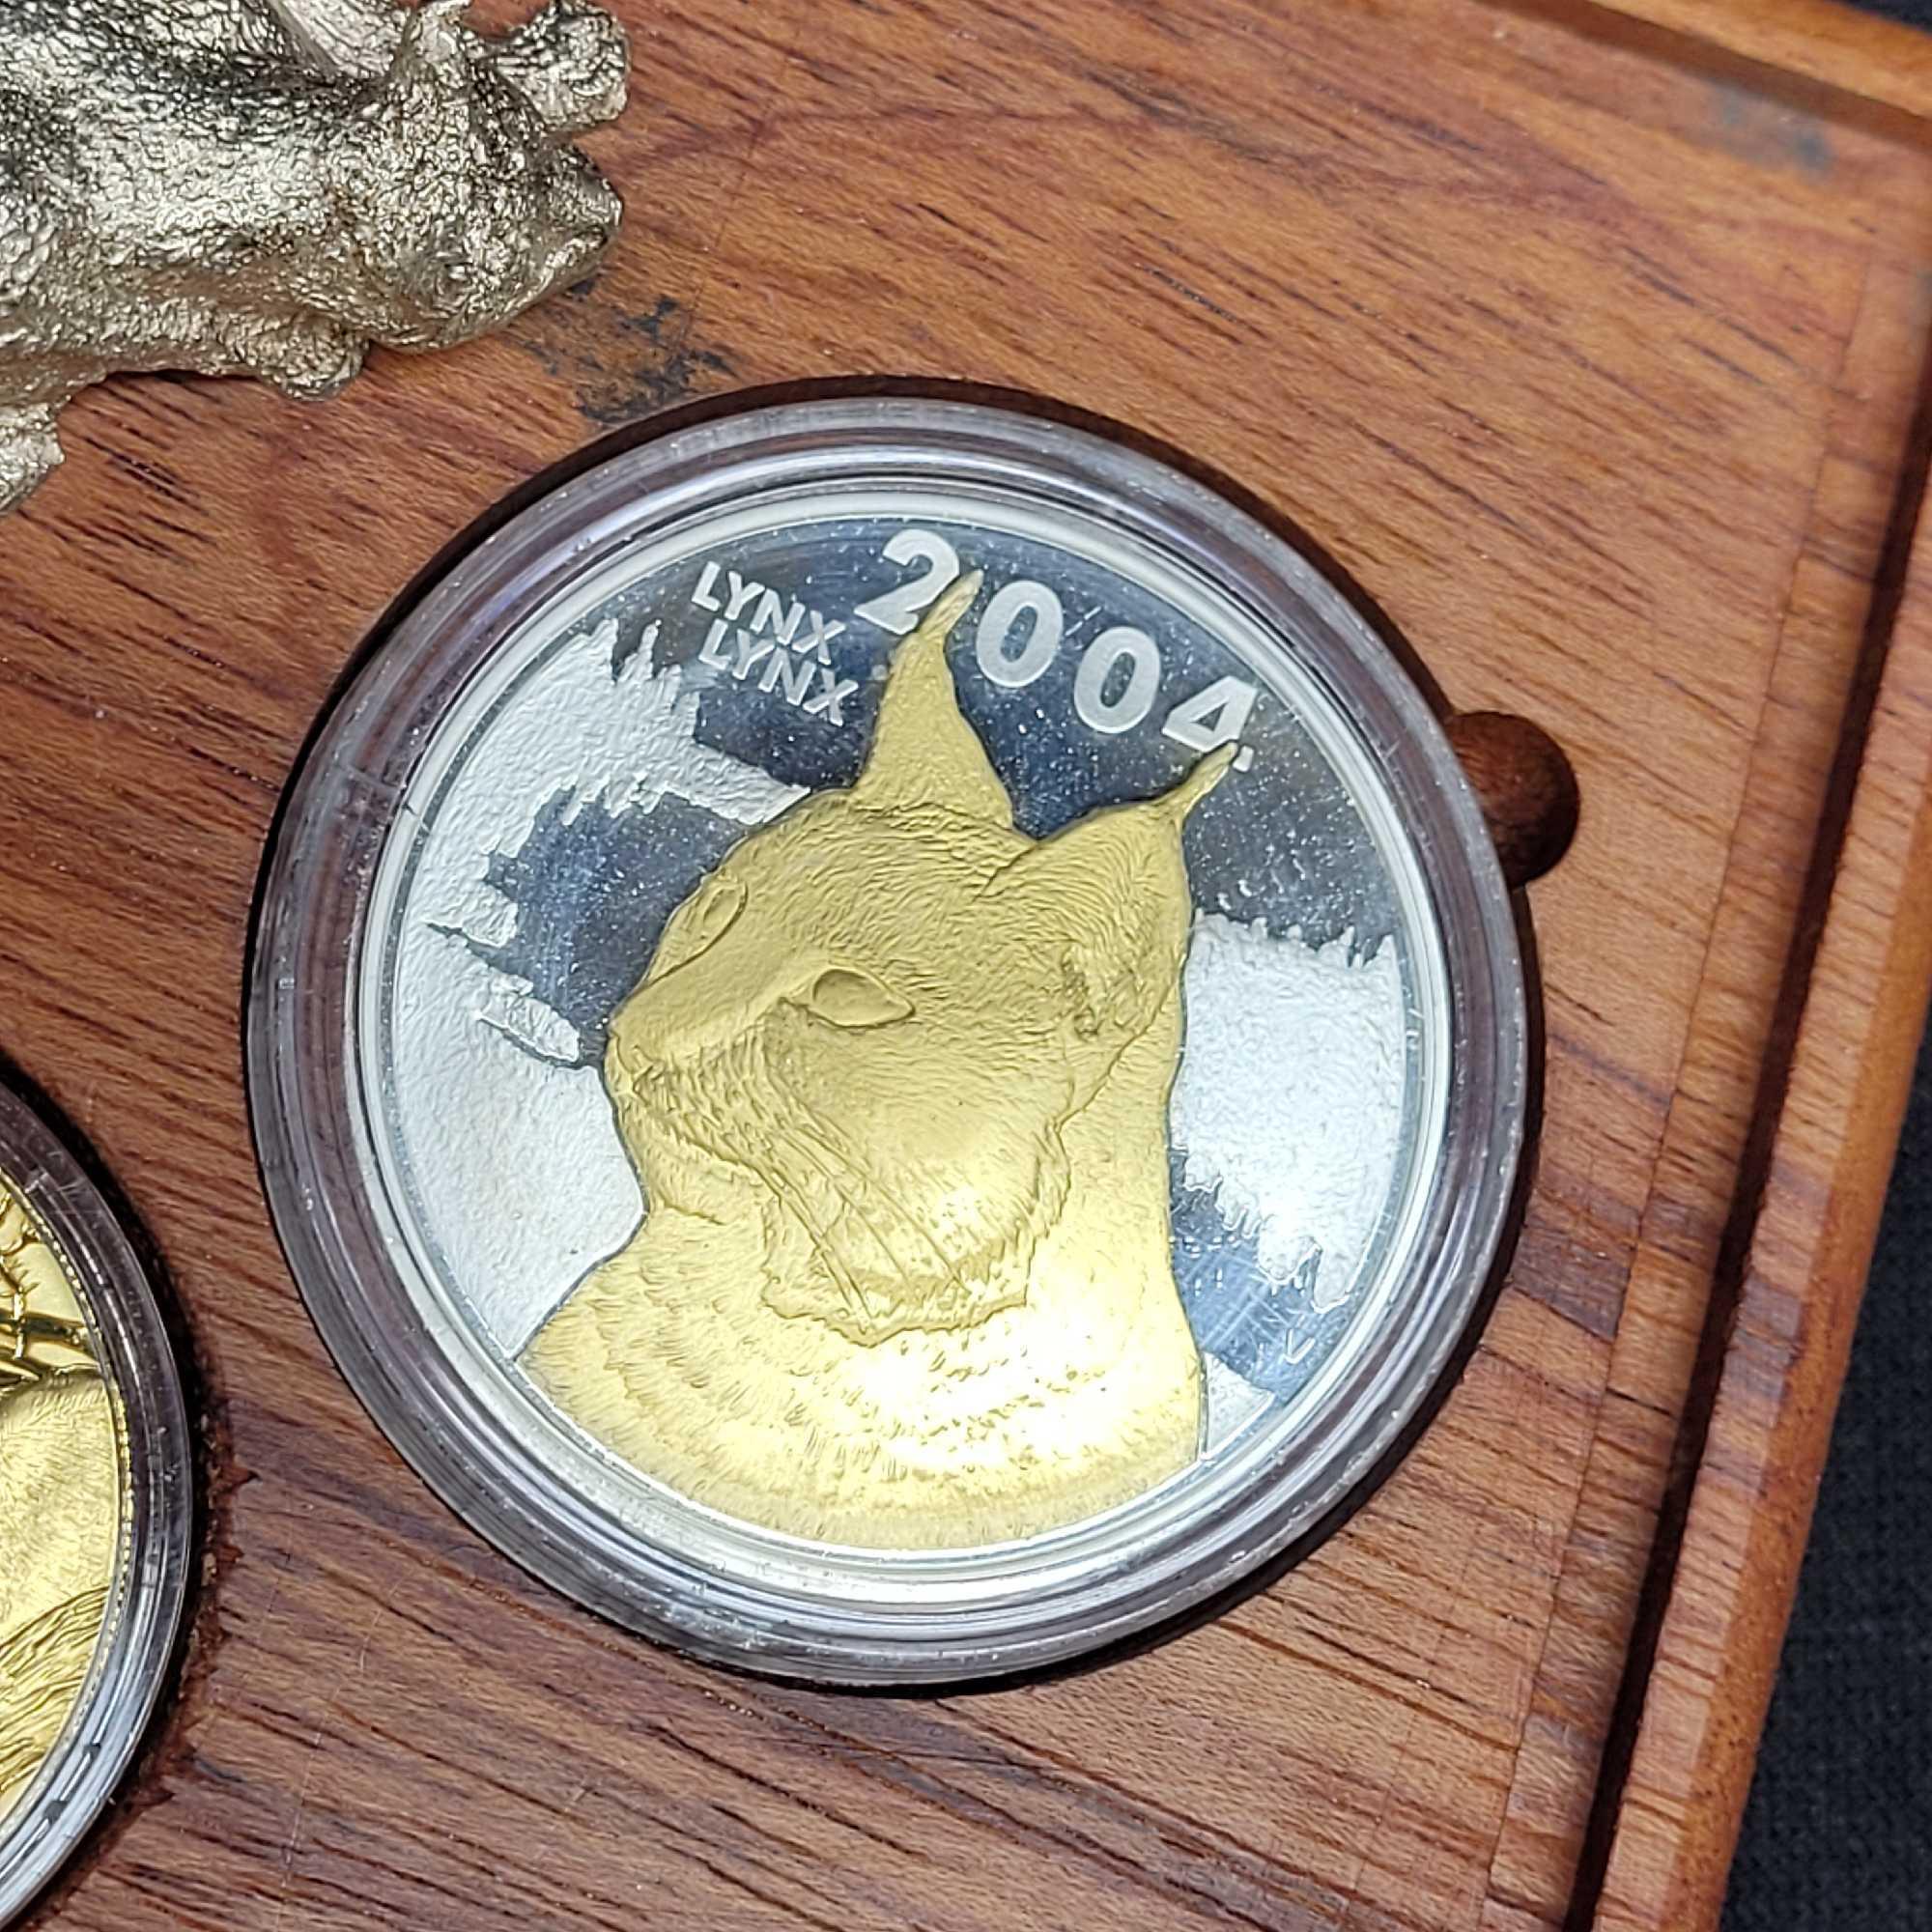 2004 Natura Launch set 24kt gold coin with silver coin and silver Lynx